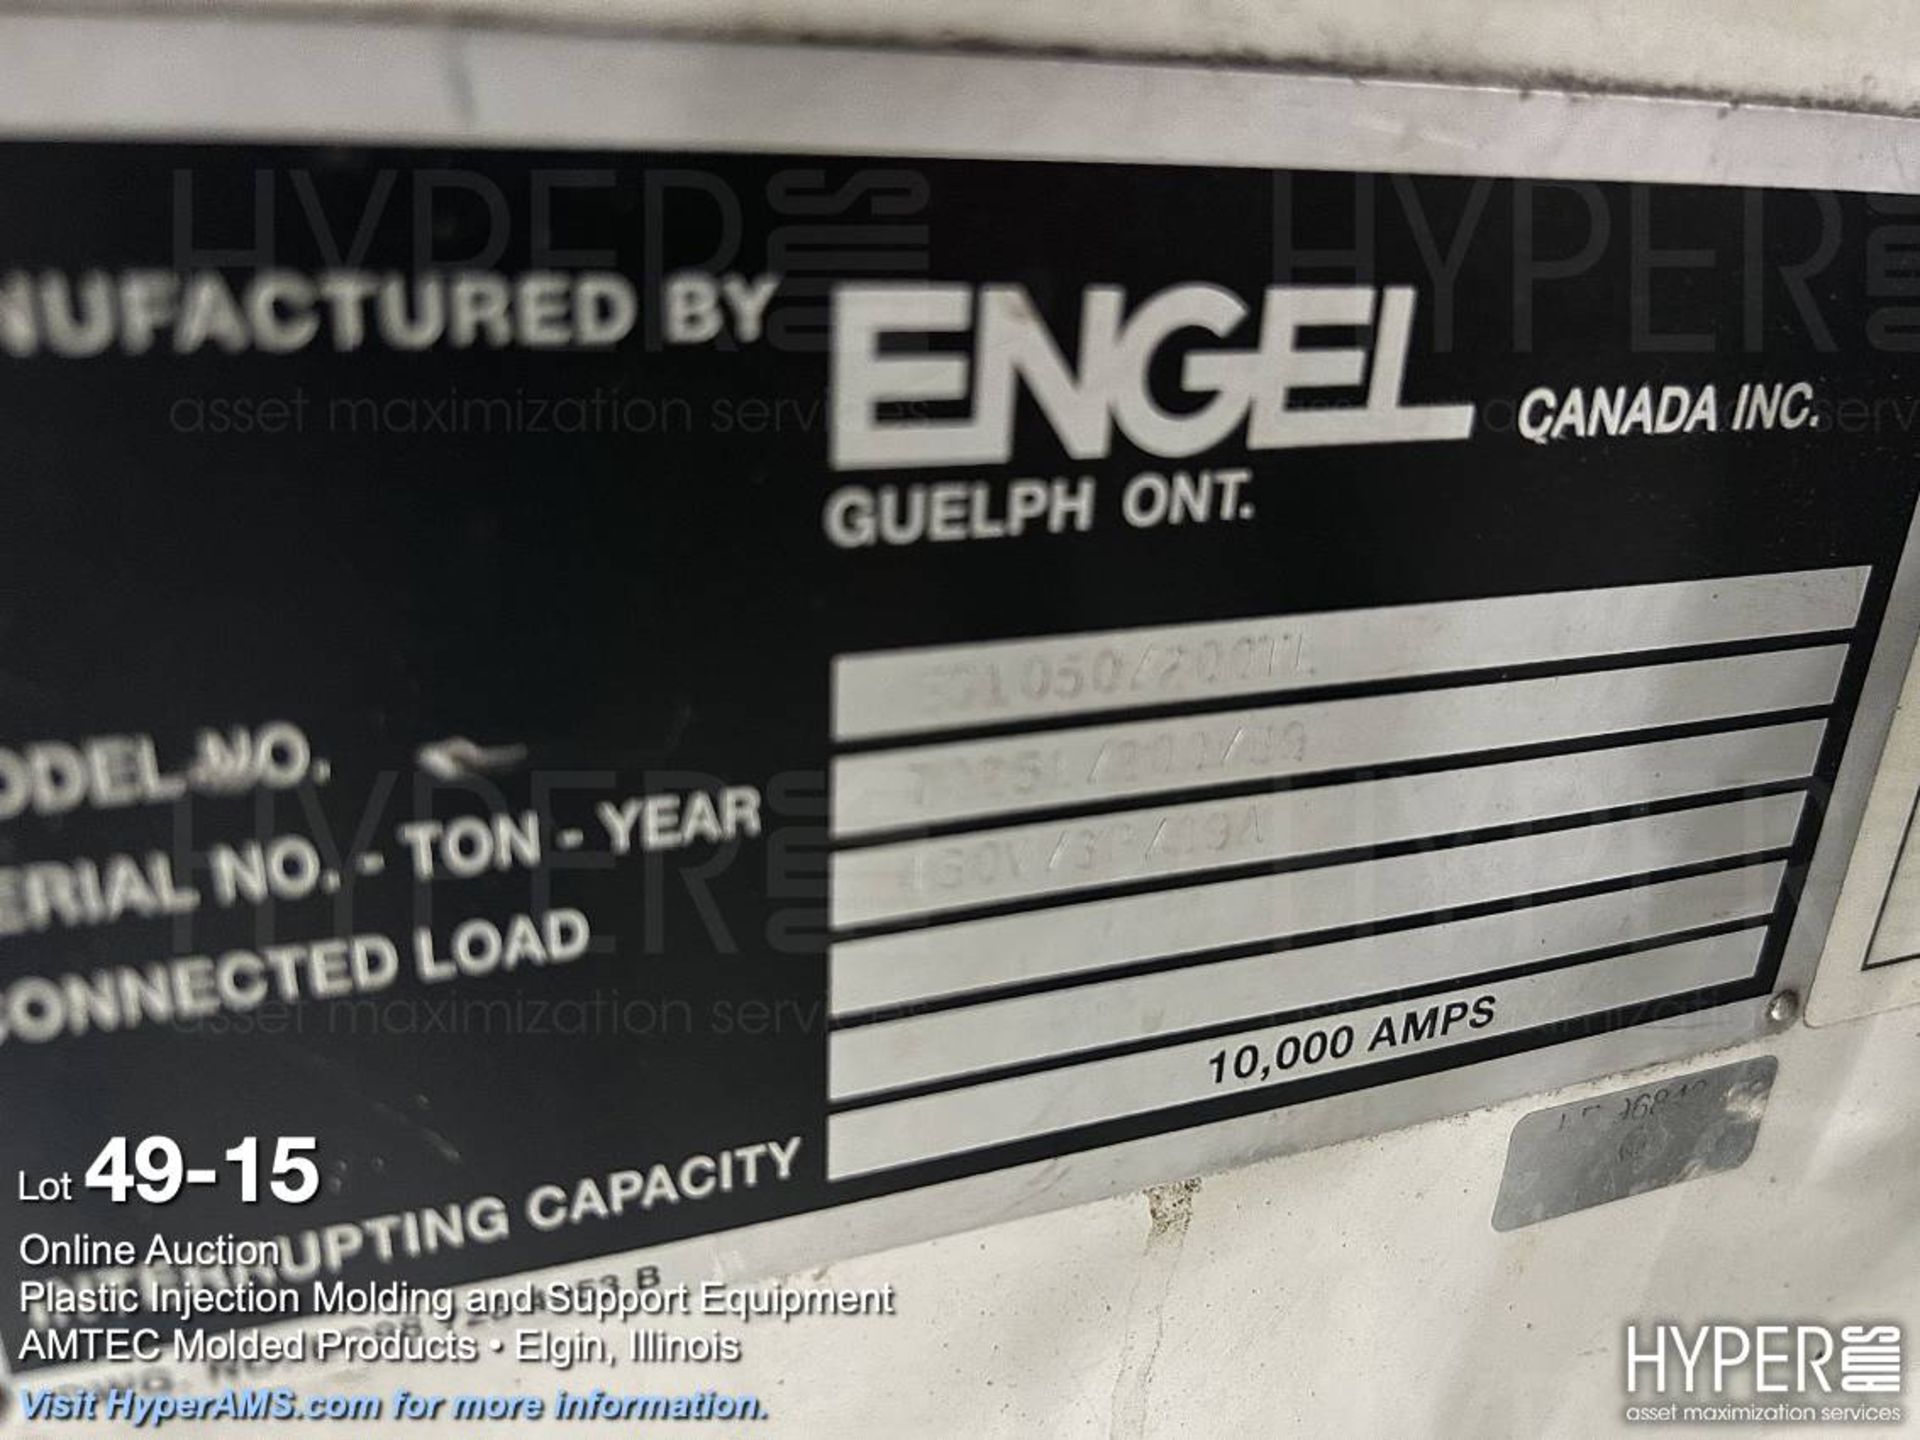 Engel ES1050/200TL toggle clamp plastic injection molding machine - Image 15 of 24